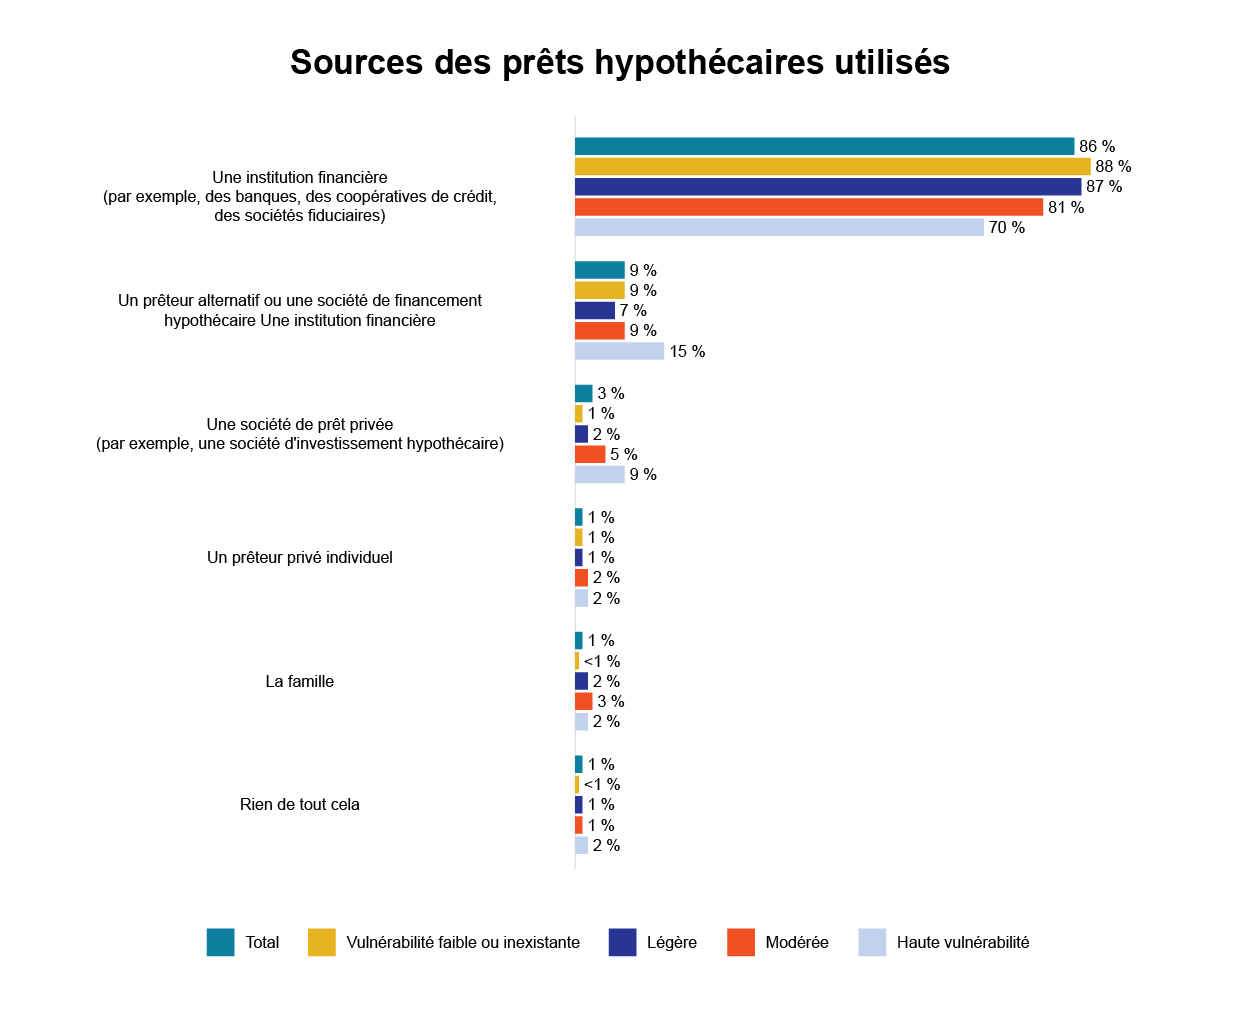 Sources of Mortgages Used (FR)